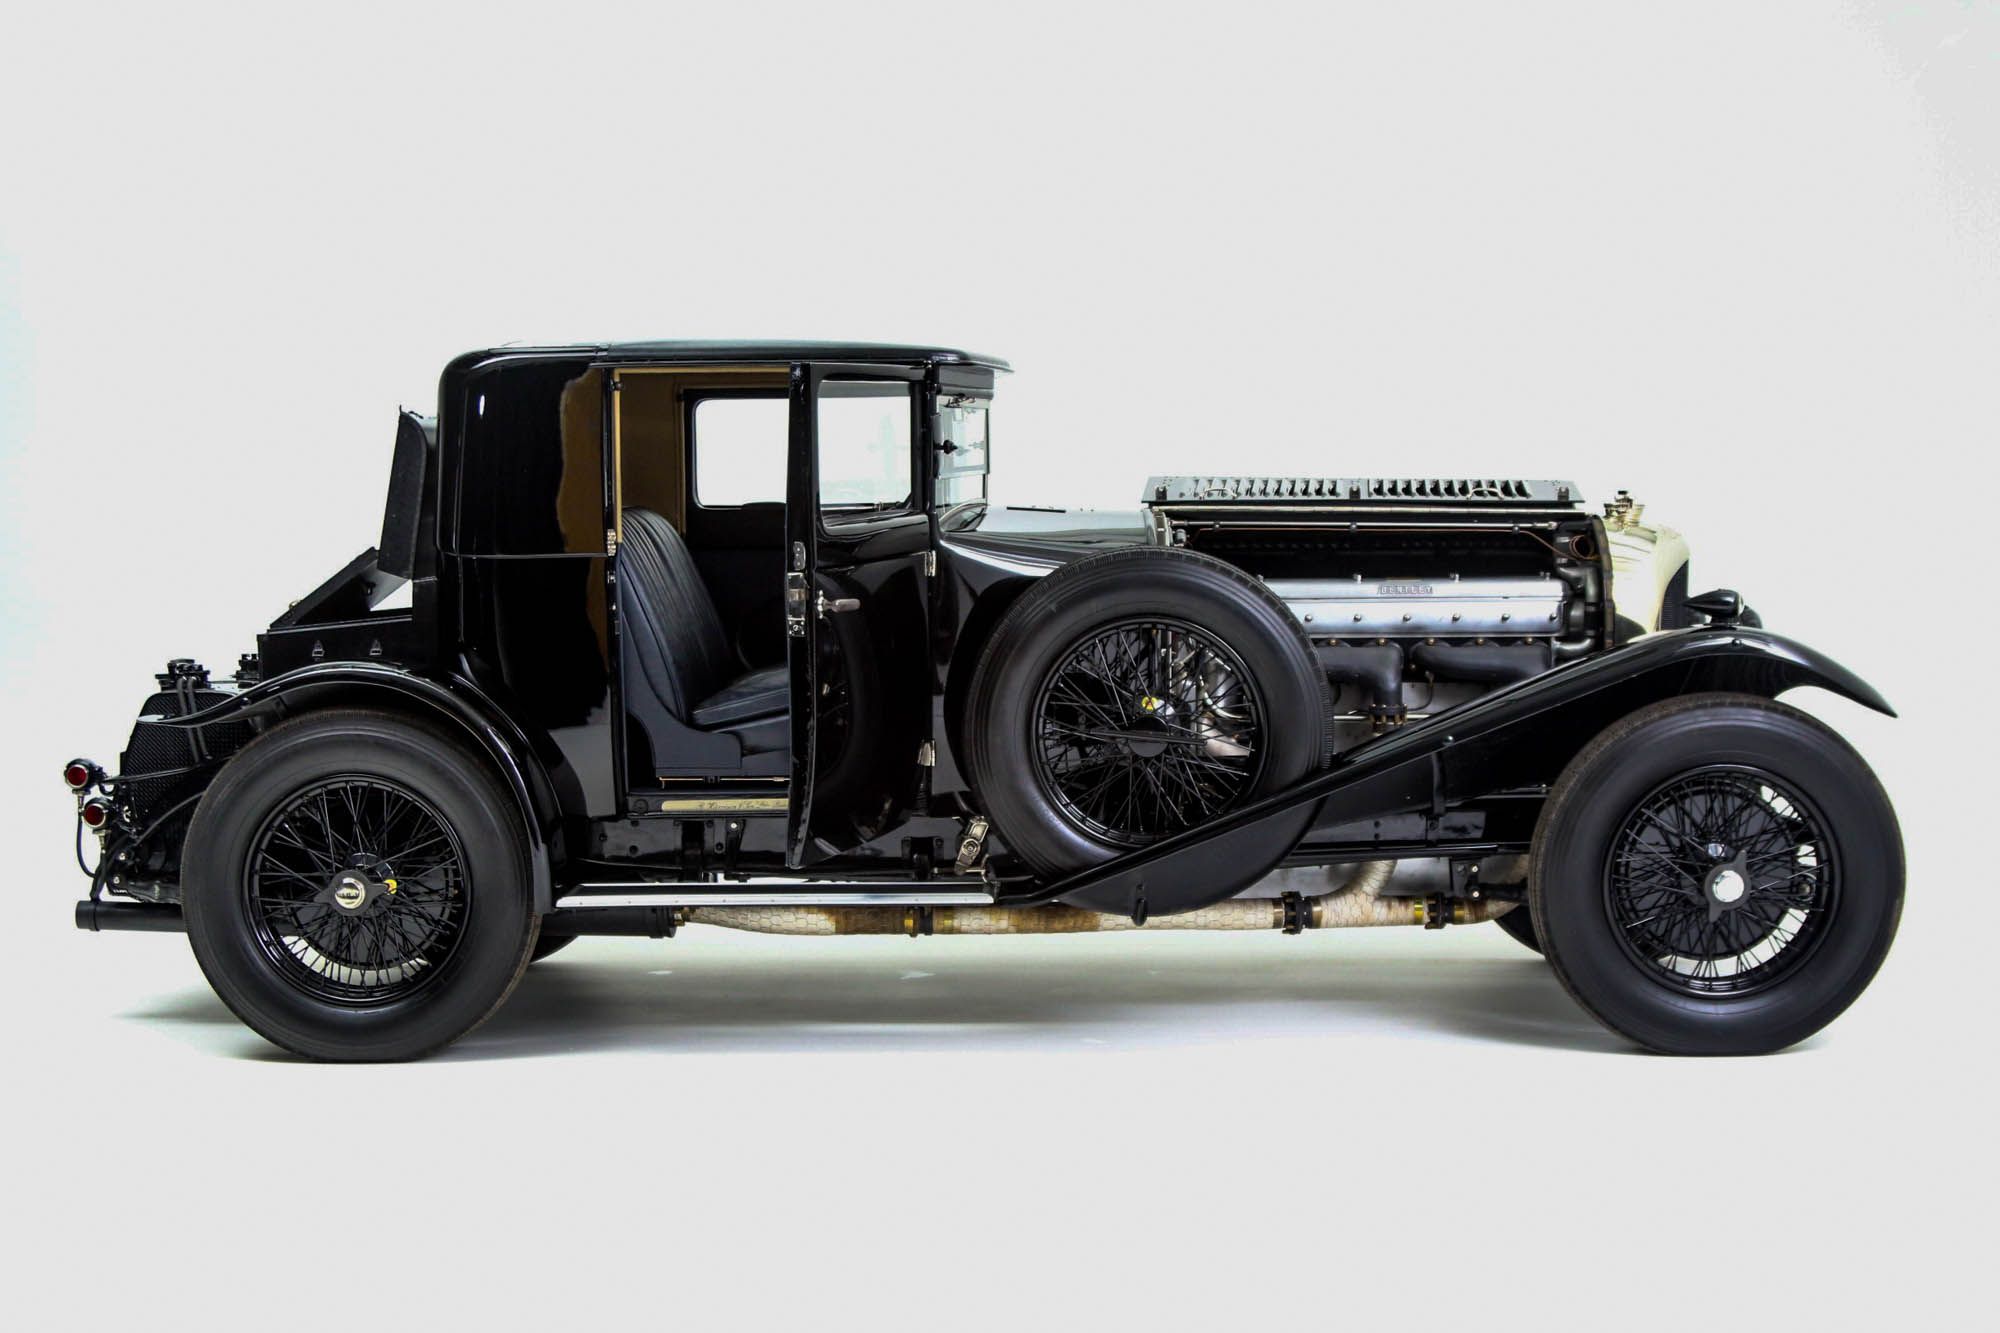 Watch and Listen: Harrison Bodied Bentley For Sale